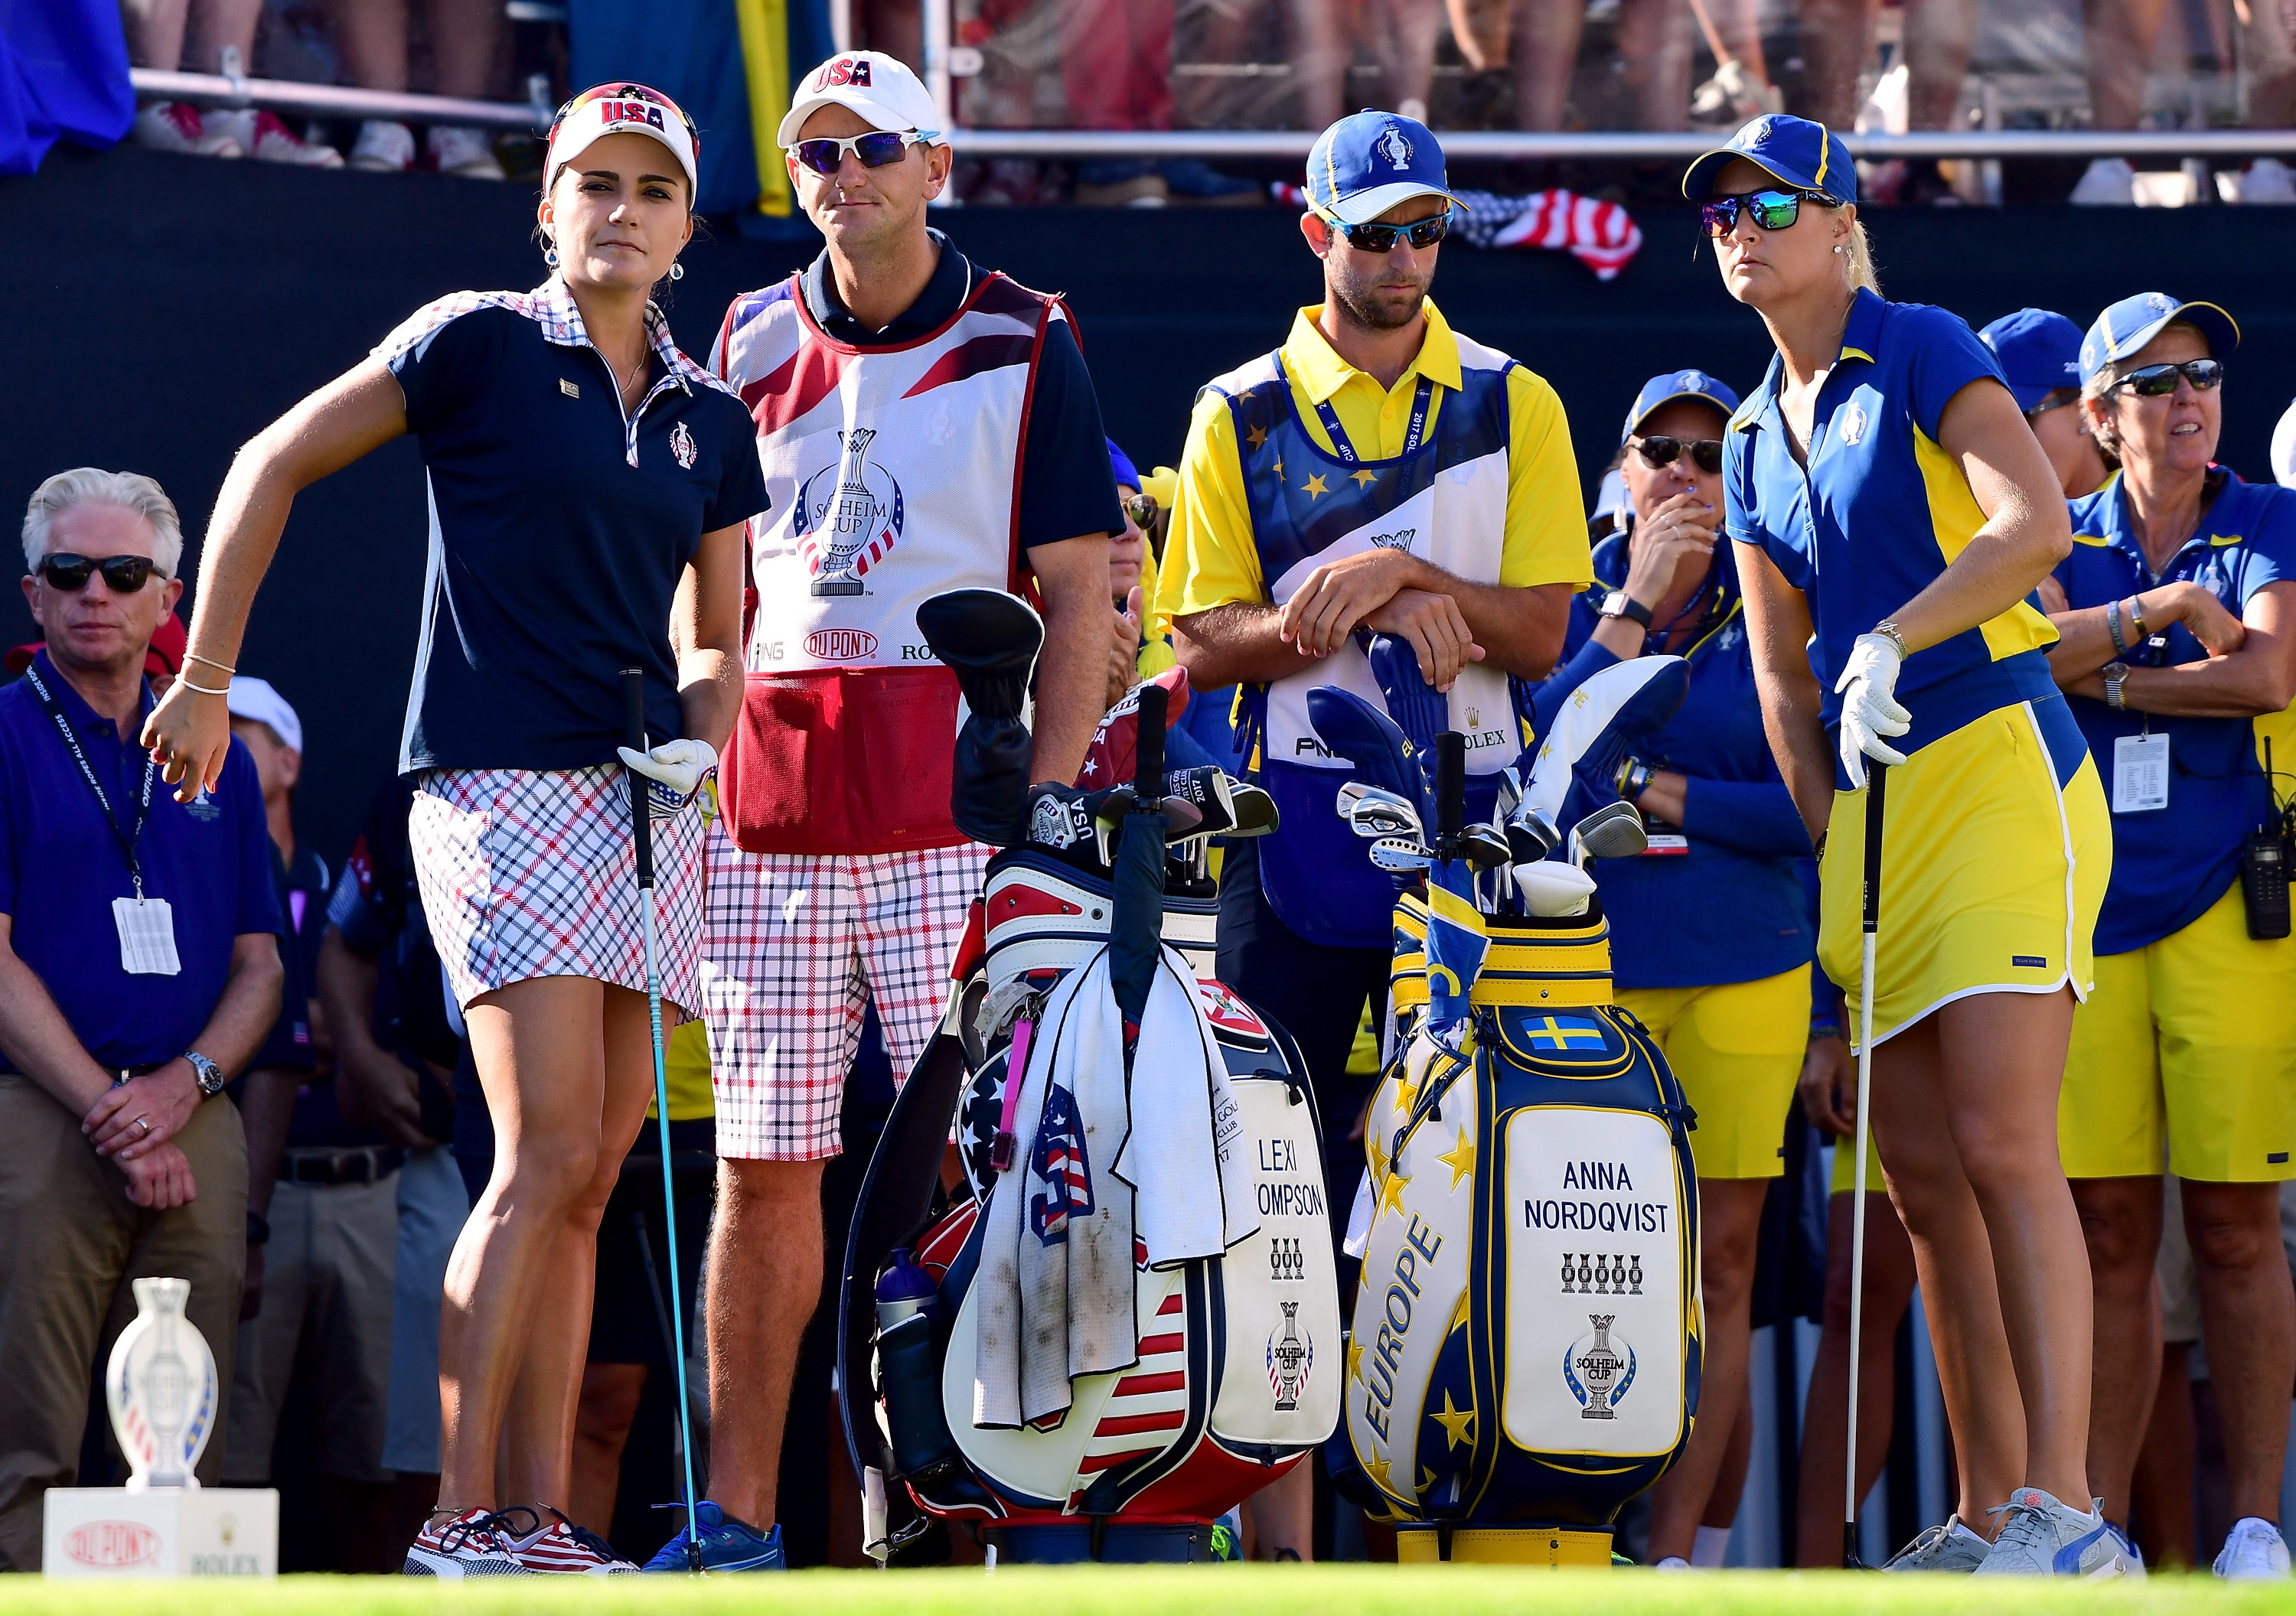 Anna Nordqvist and Lexi Thompson played one of the classic matches on the final day of the Solheim Cup.